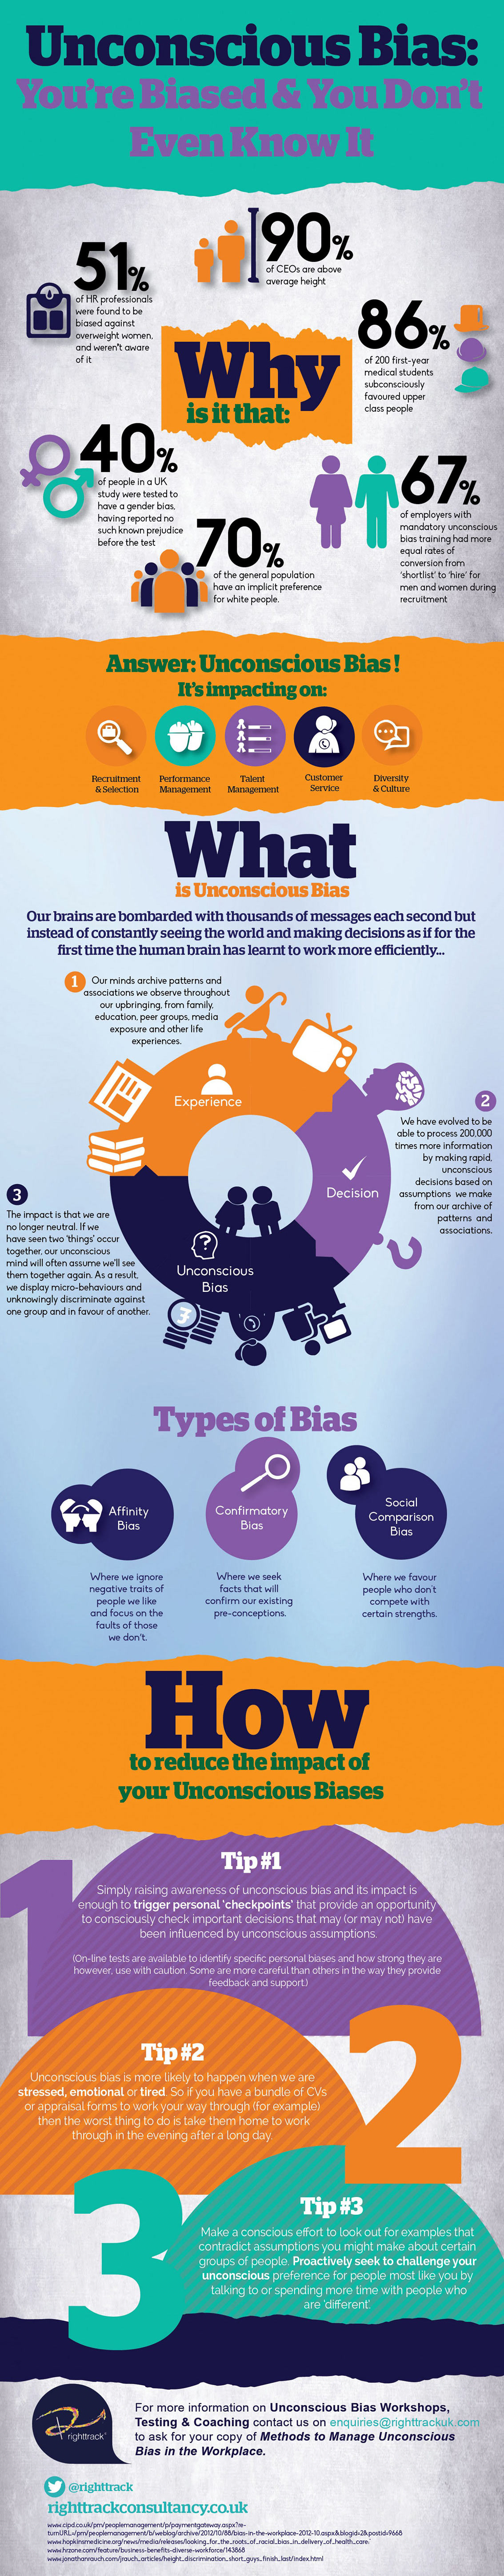 You are Biased and You Dont Even Know It - Psychology Infographic